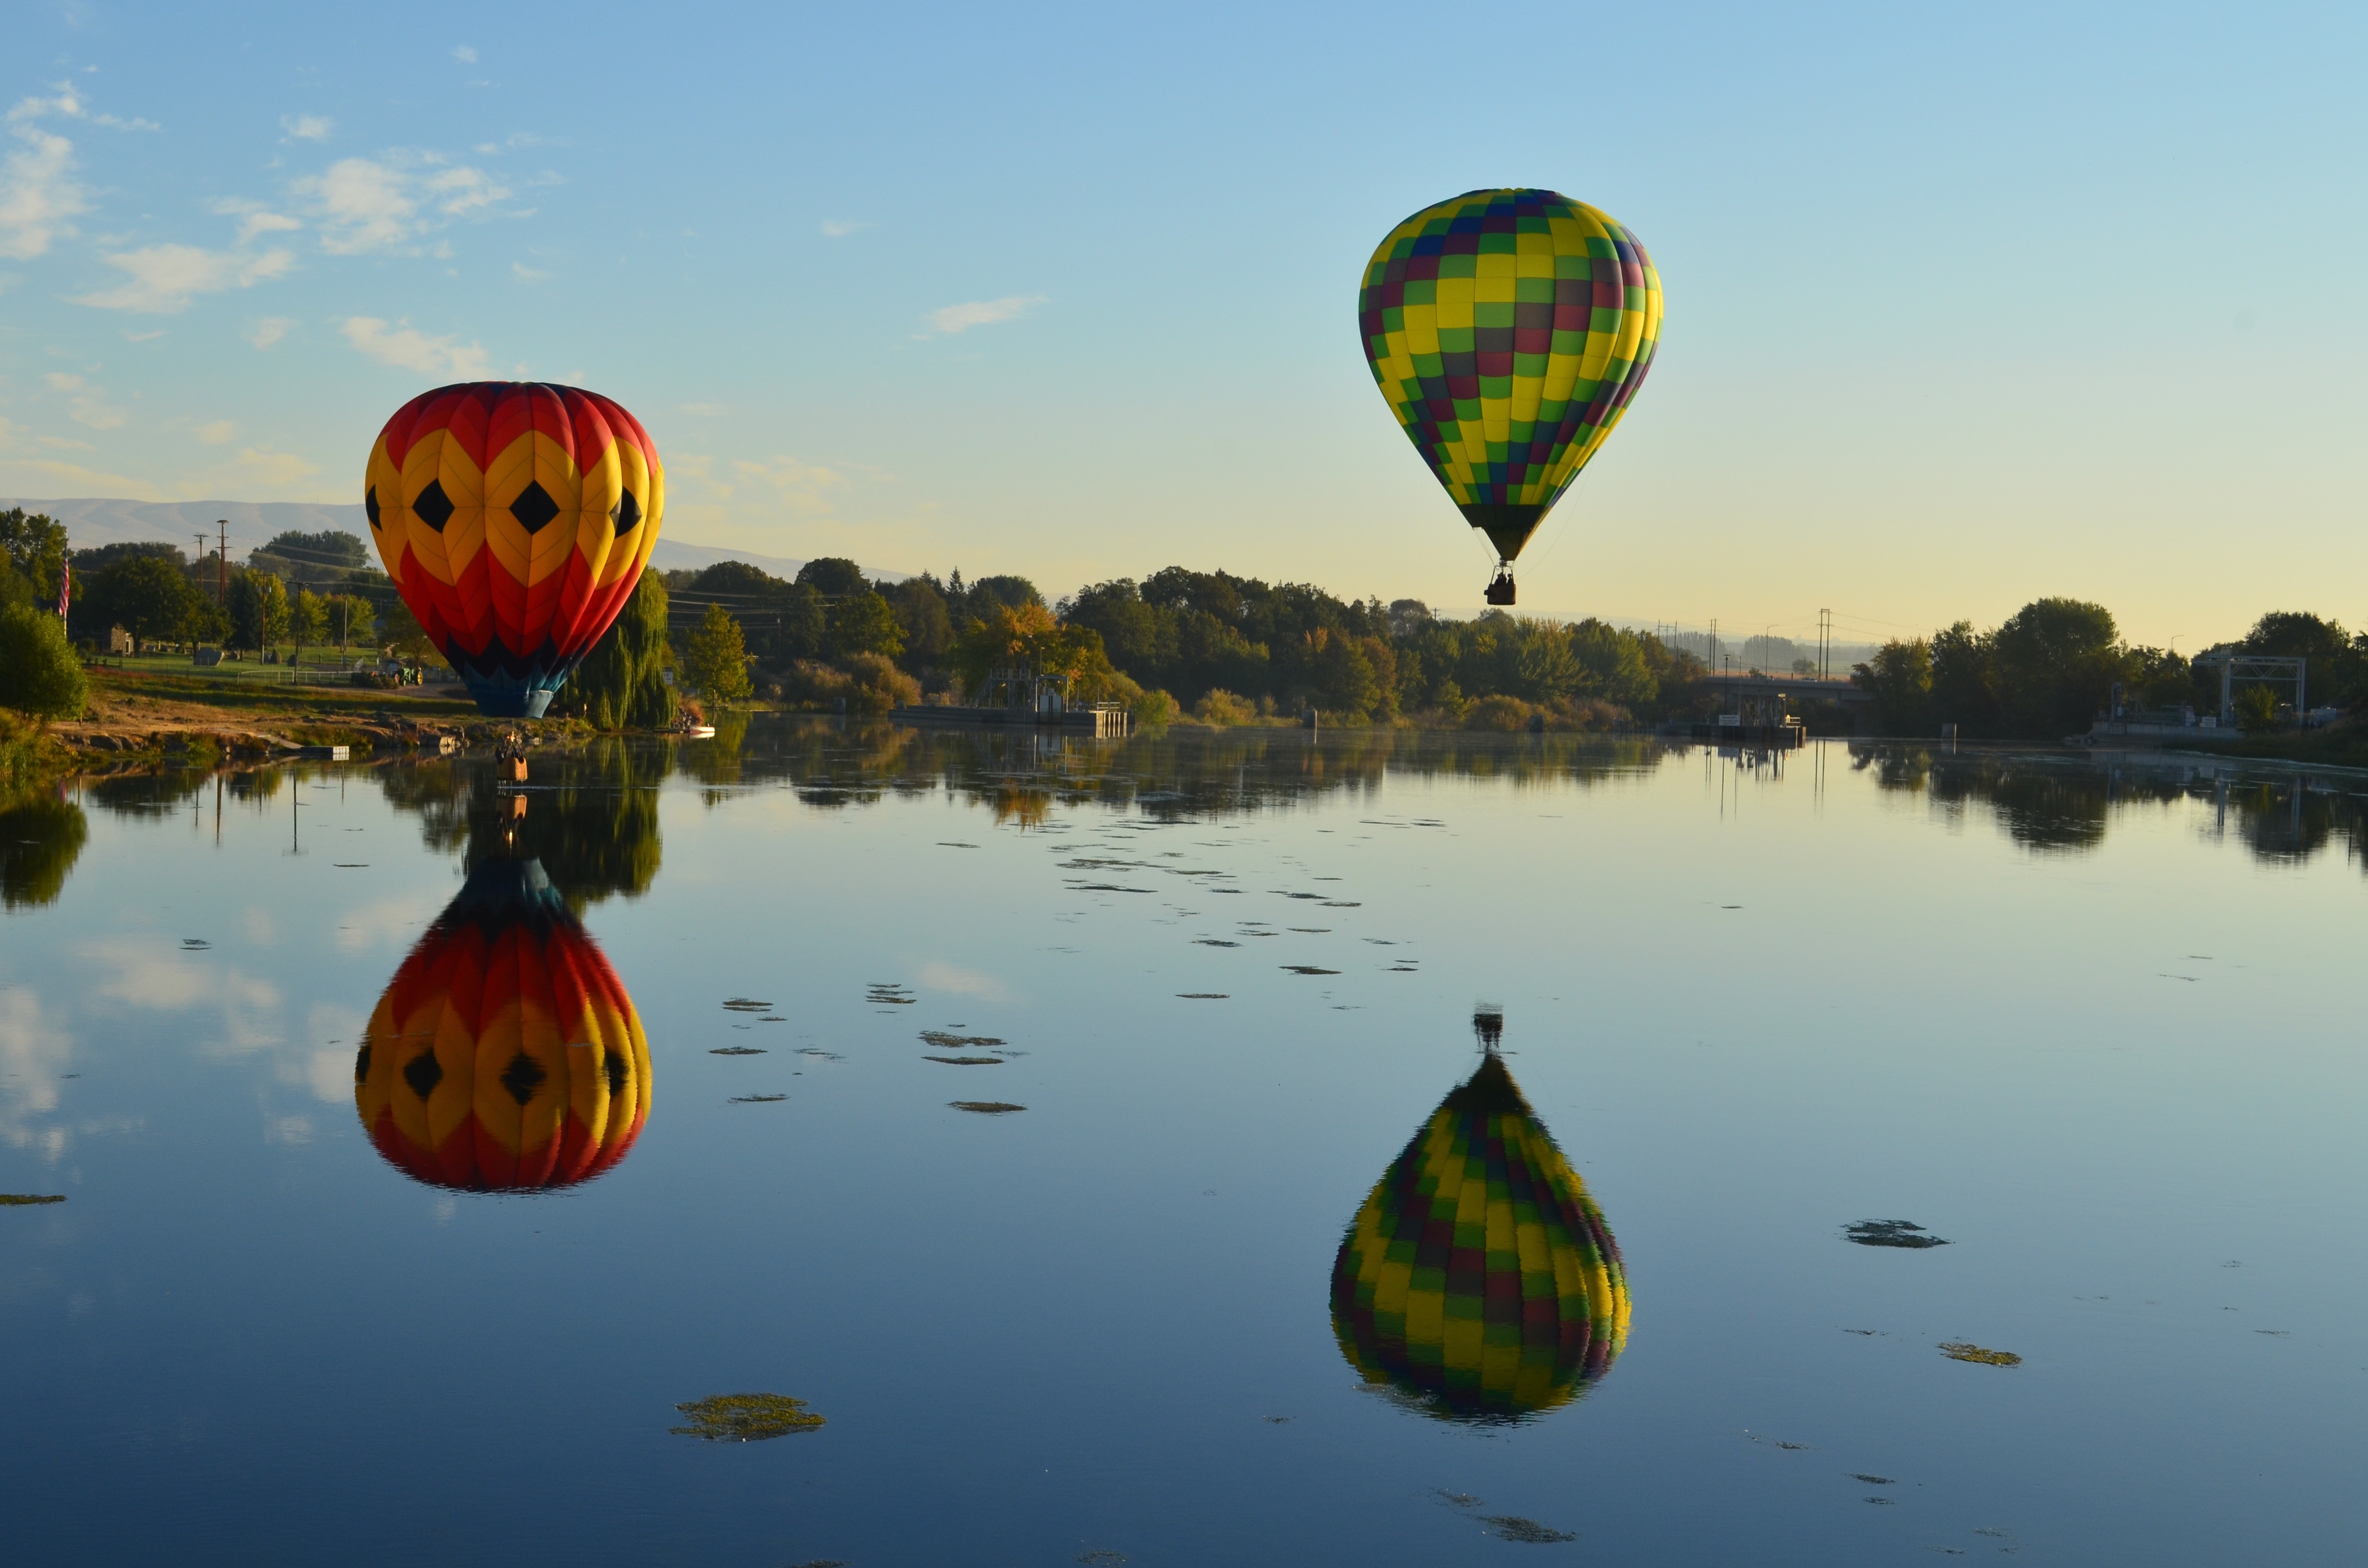 two hot air balloons floating above body of water under clear sky during daytime